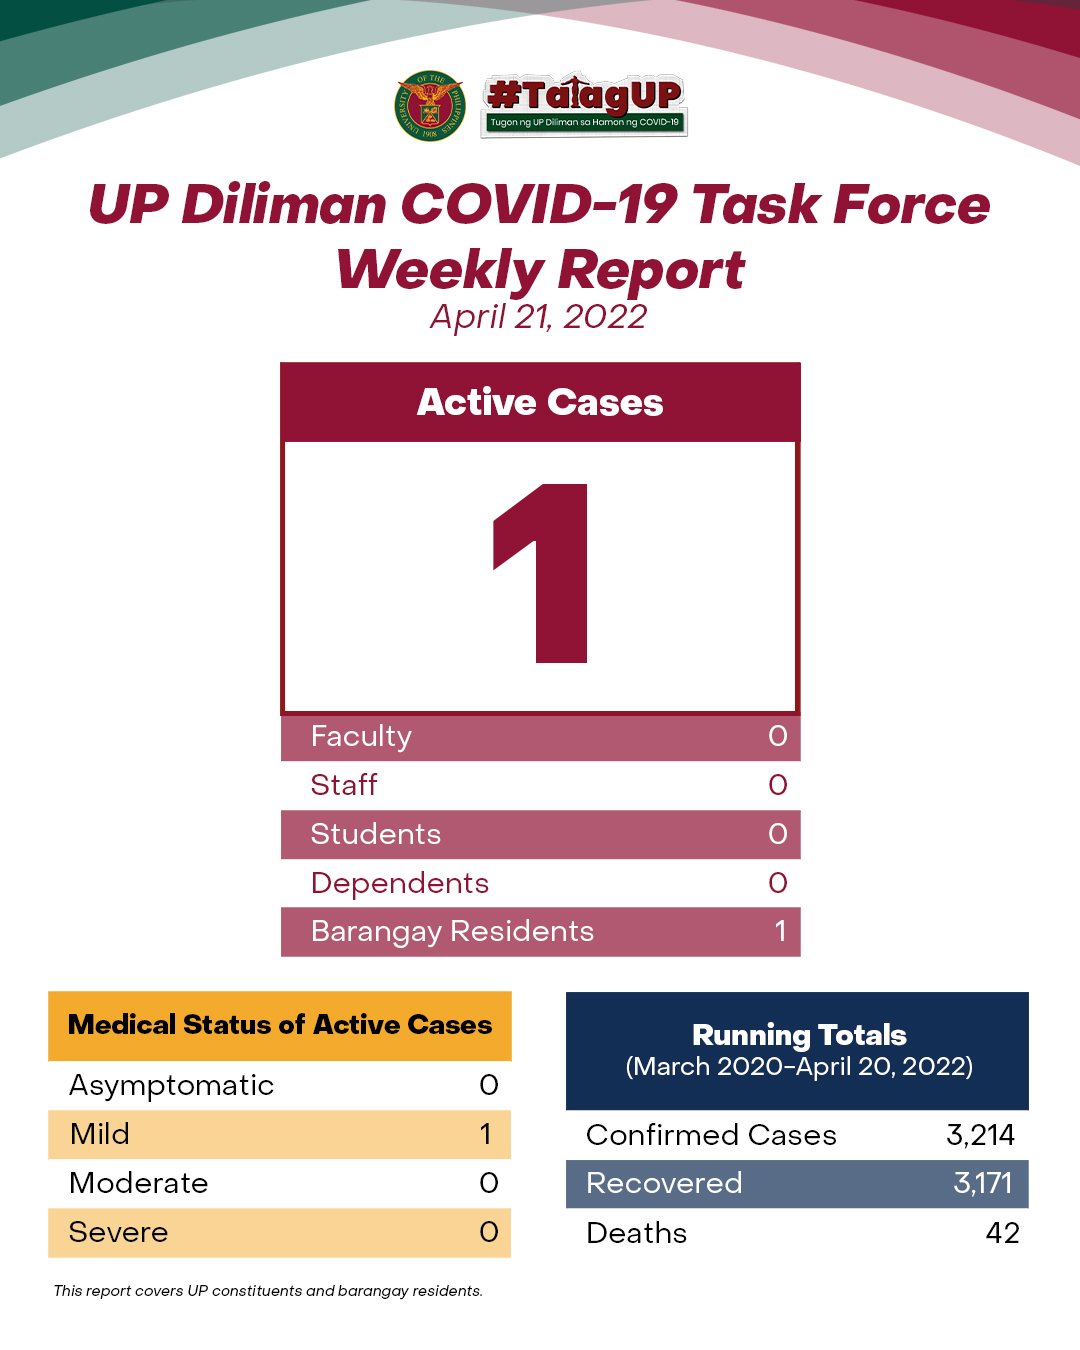 UP Diliman COVID-19 Task Force Weekly Report (April 21, 2022)